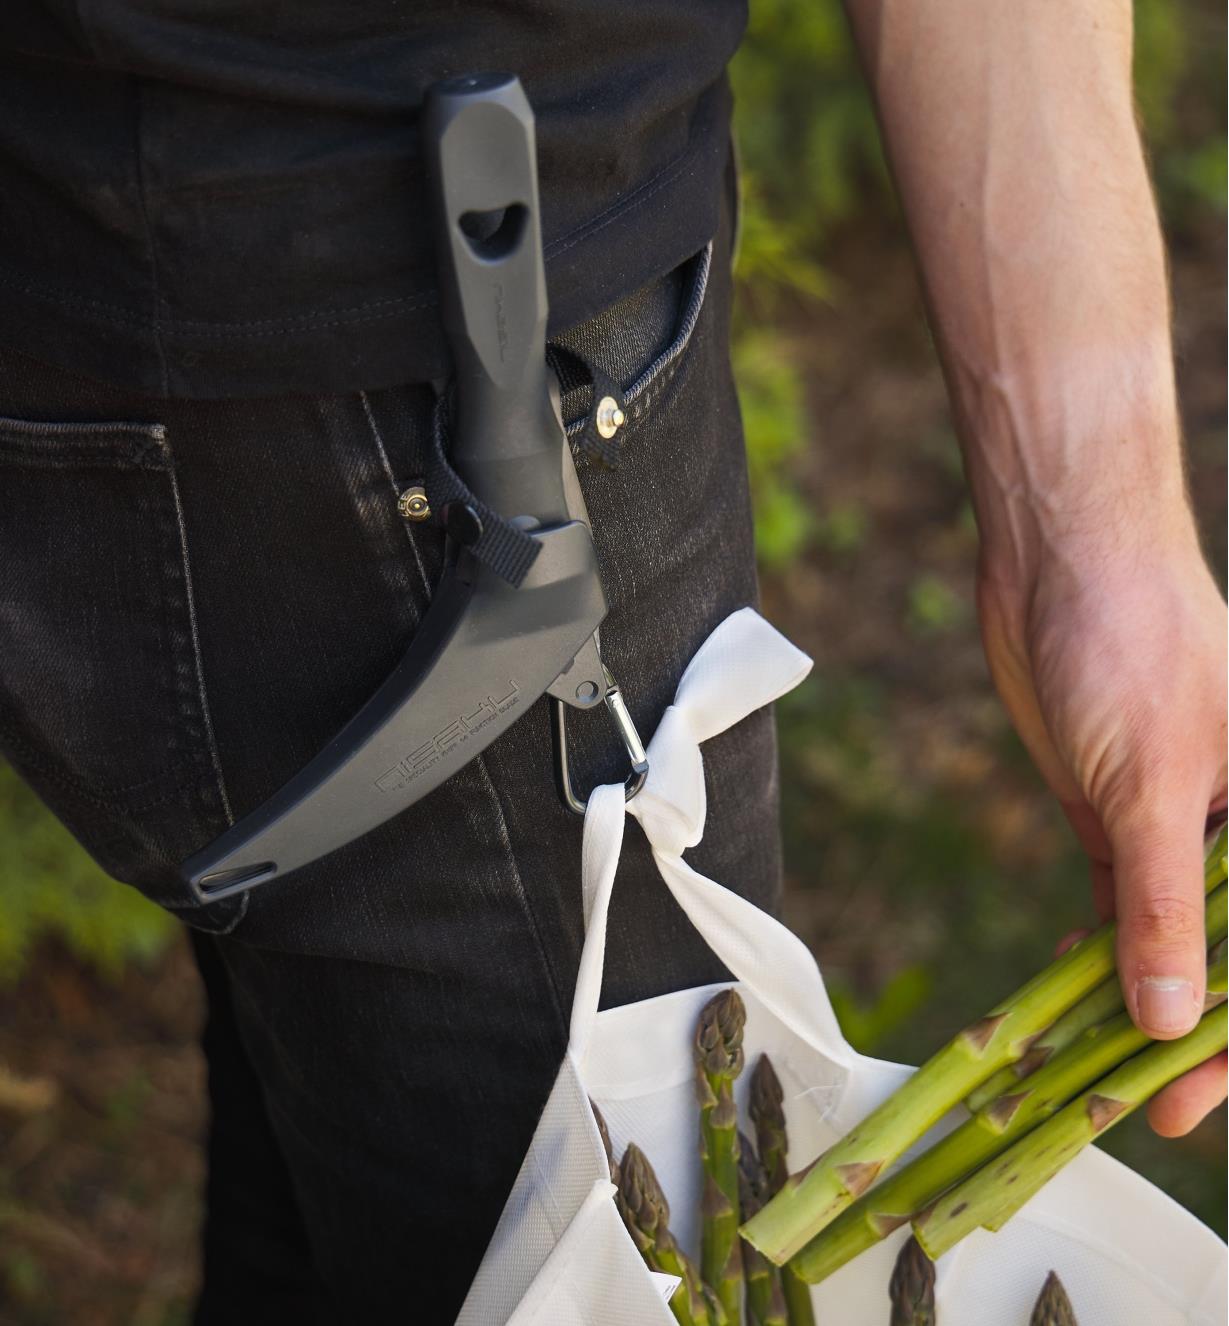 The sickle knife and sheath worn on a belt with a harvest bag suspended from the carabiner clip